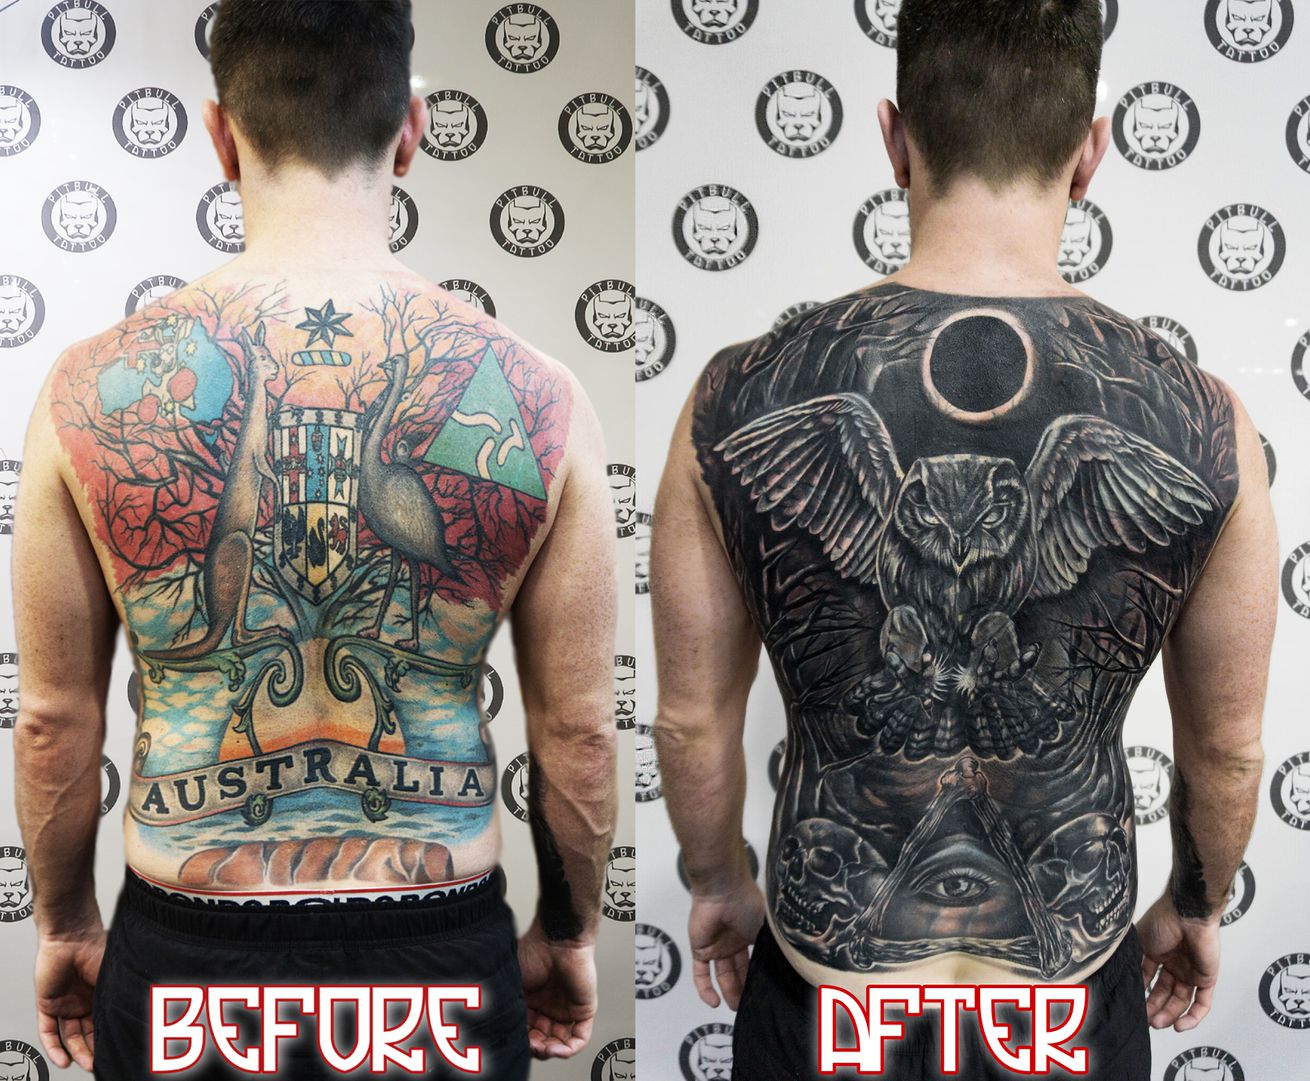 Vol 1 Top 18 Tattoo Cover Ups  Before and After Tattoo Removal